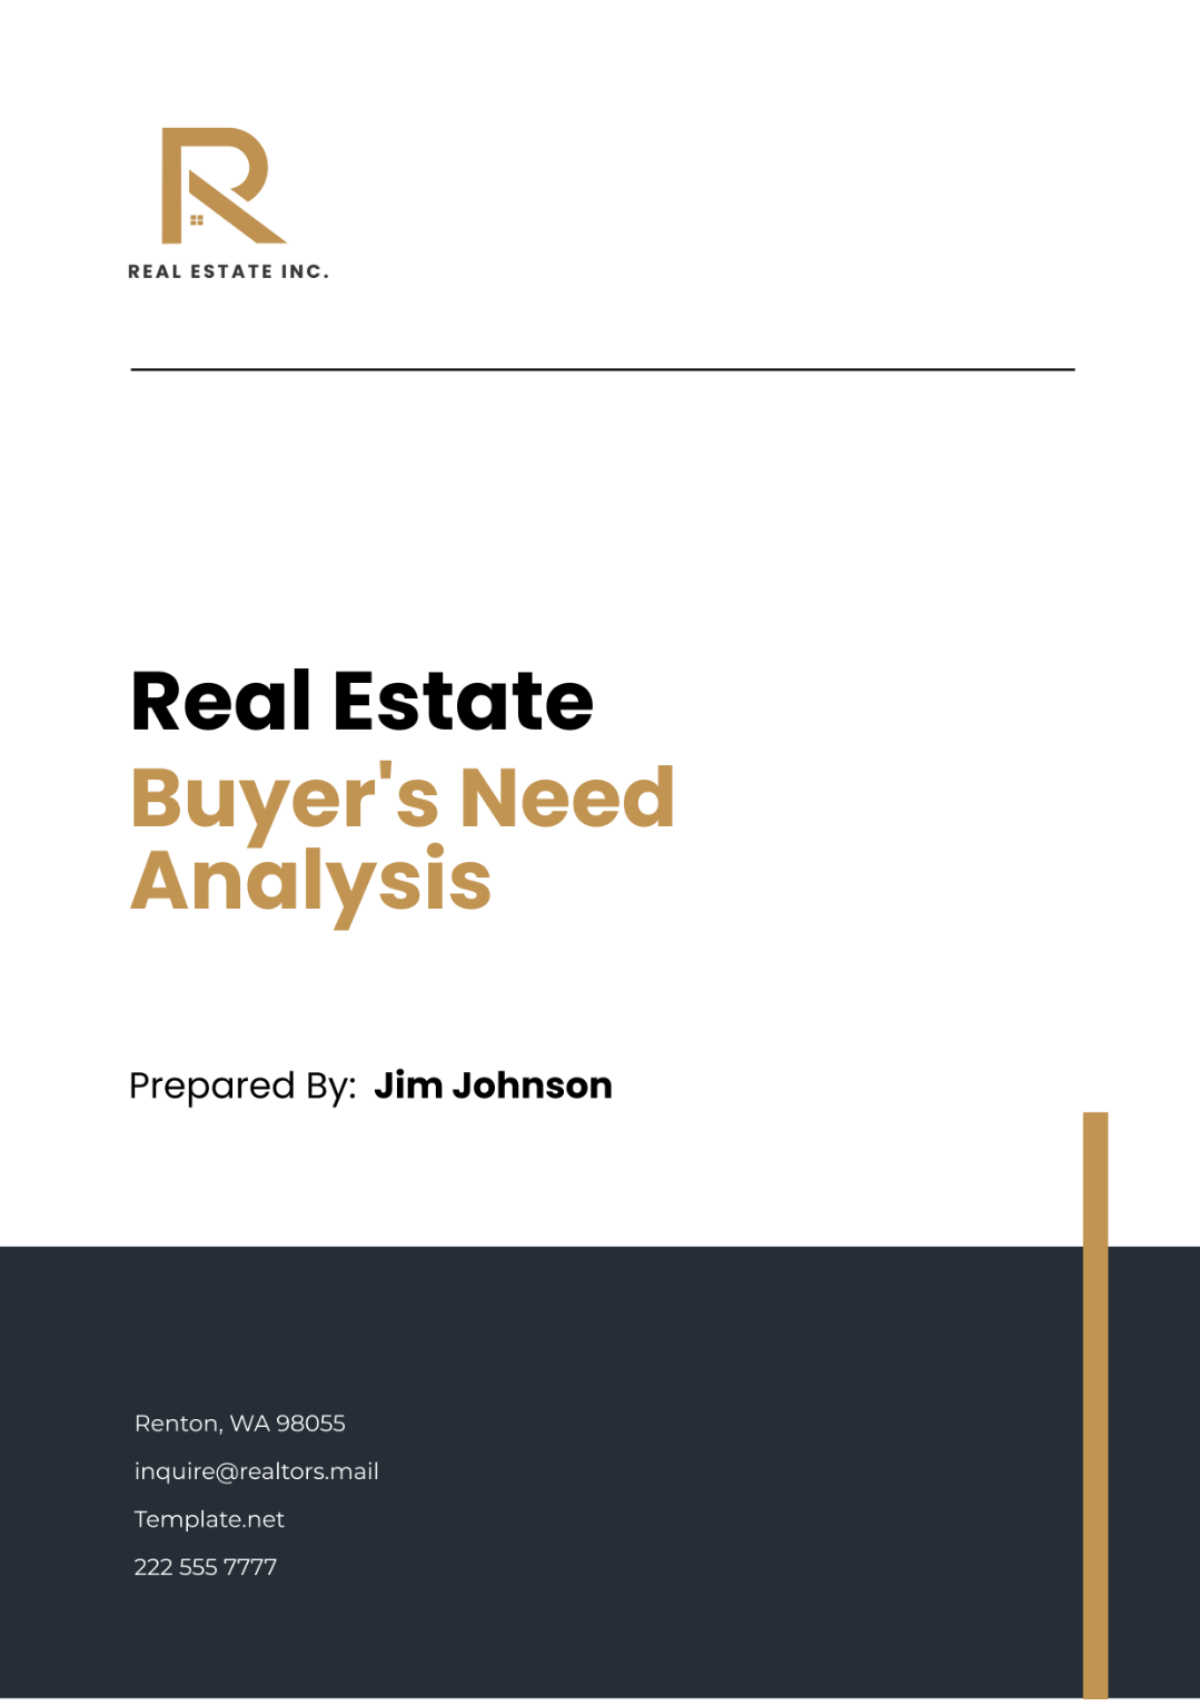 Free Real Estate Buyer's Need Analysis Template